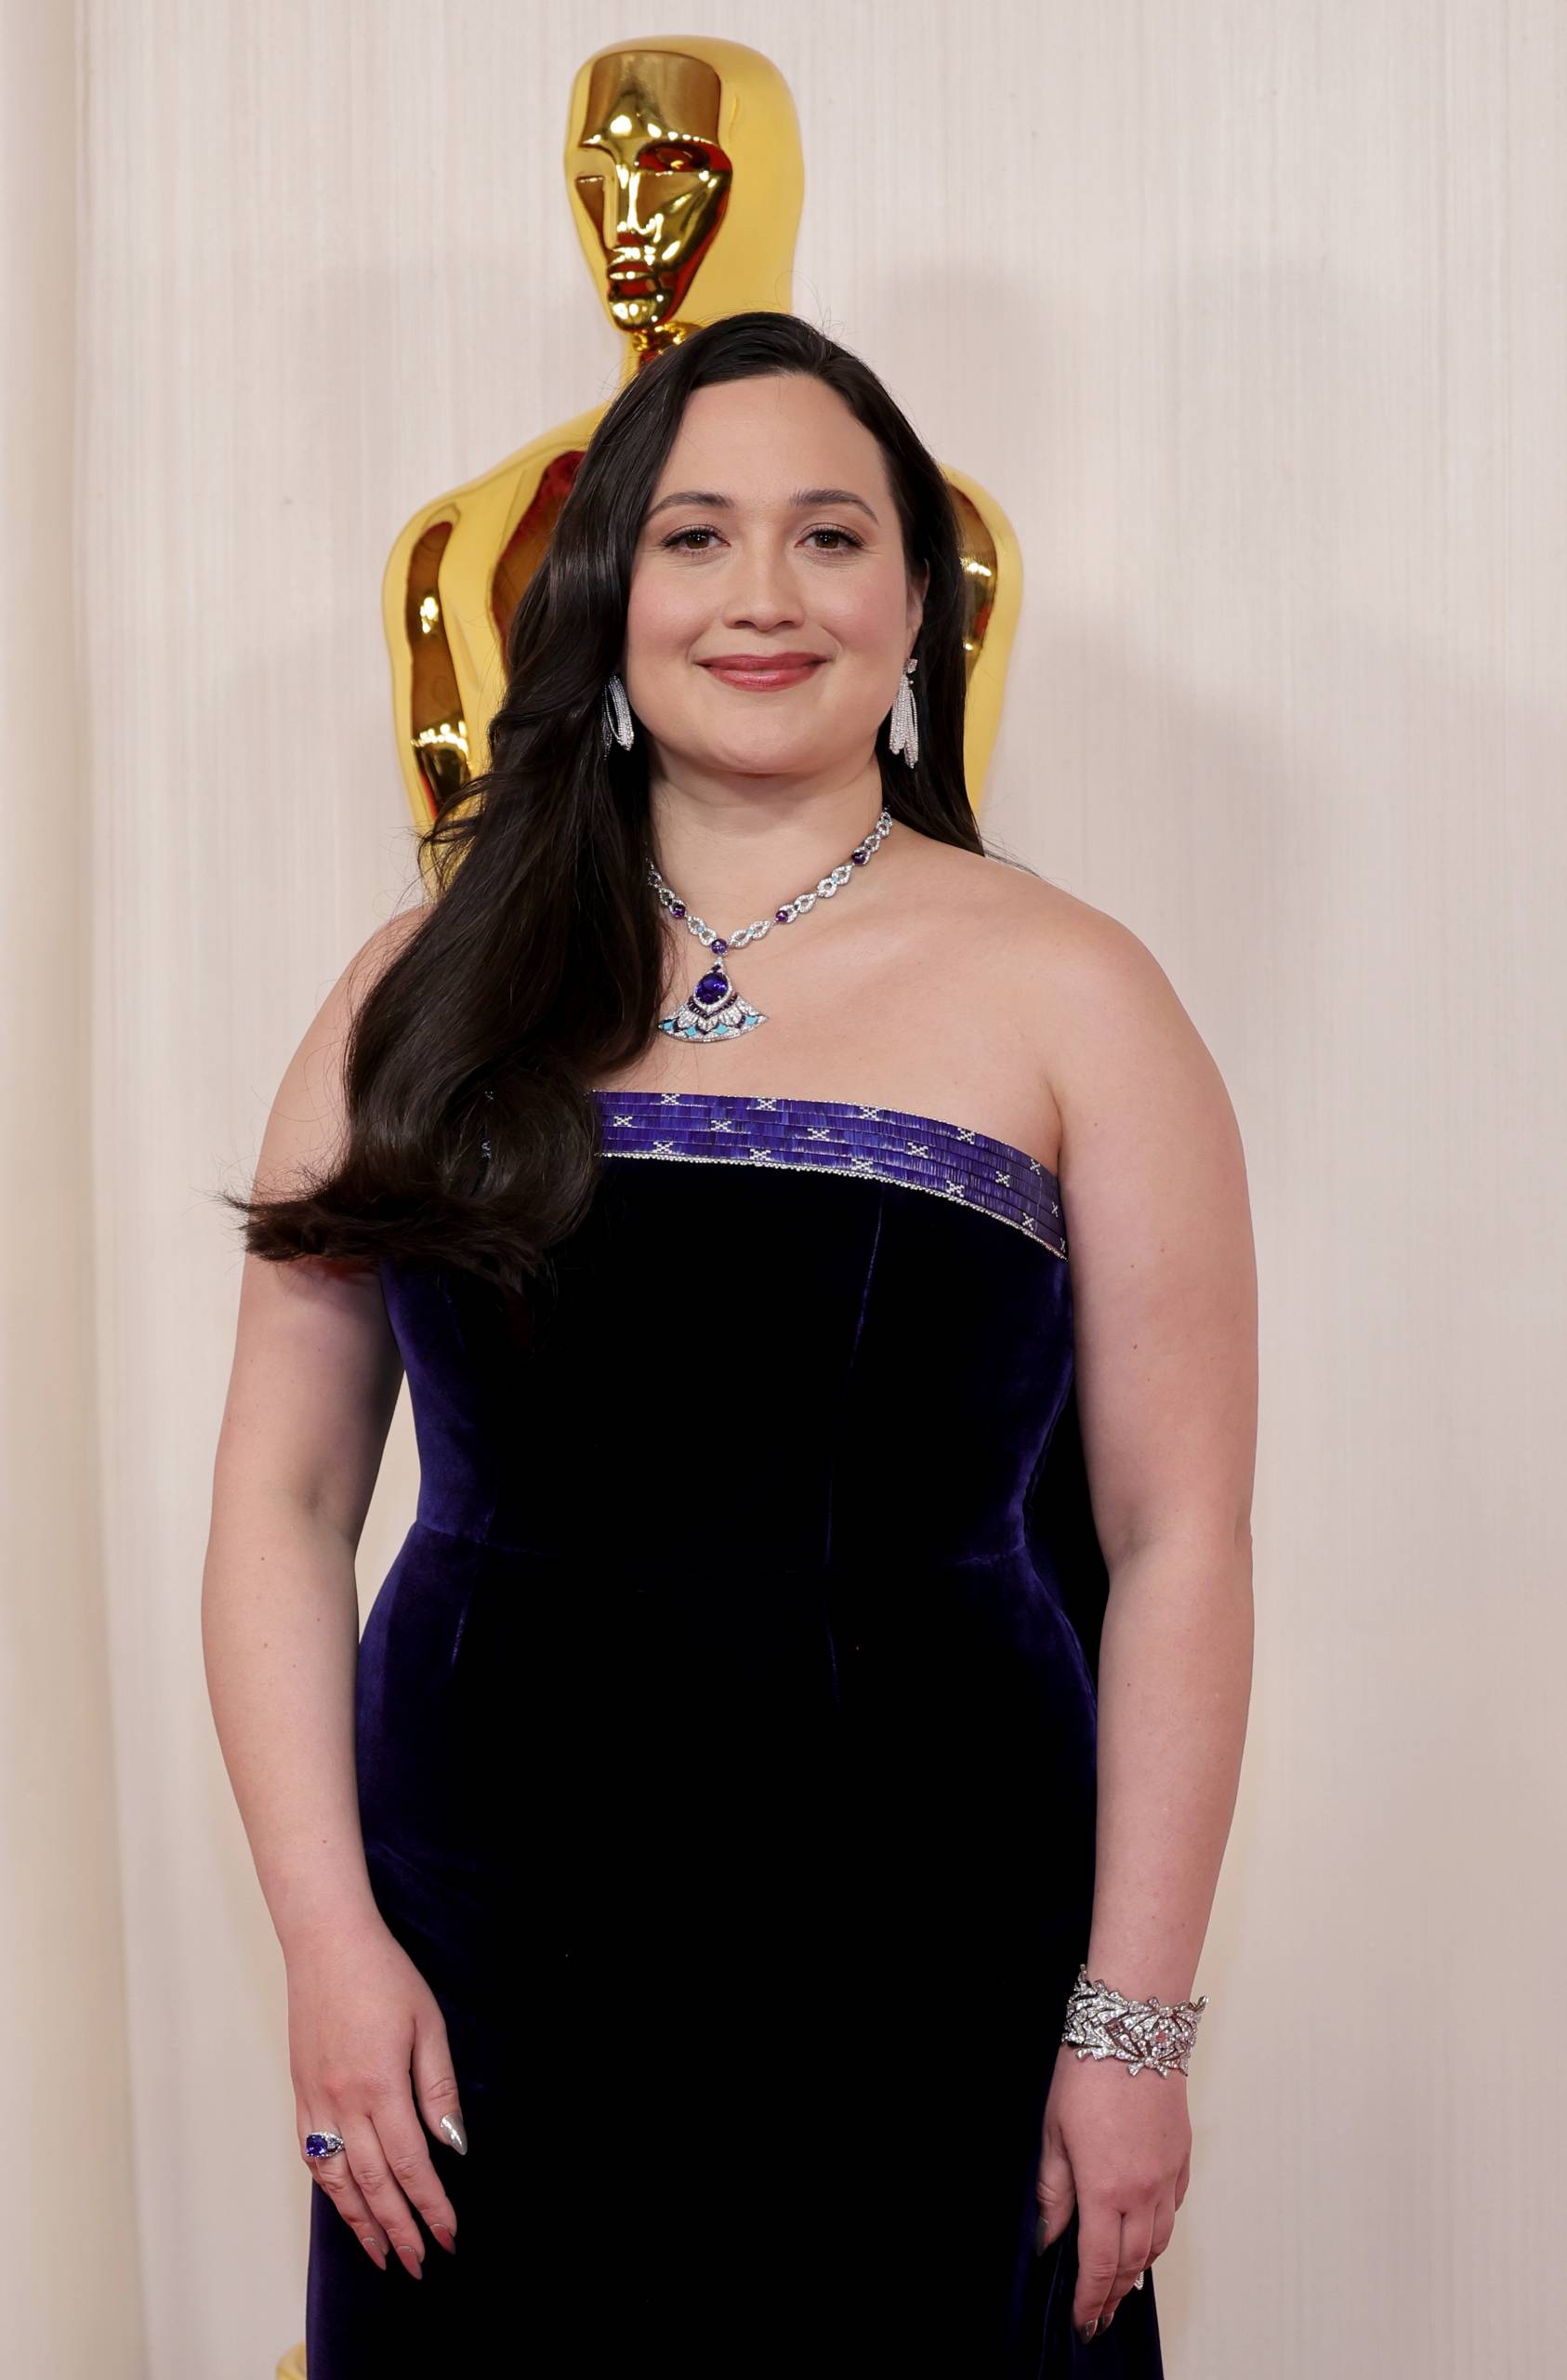 An Indigenous woman wears a strapless purple gown and jewels.